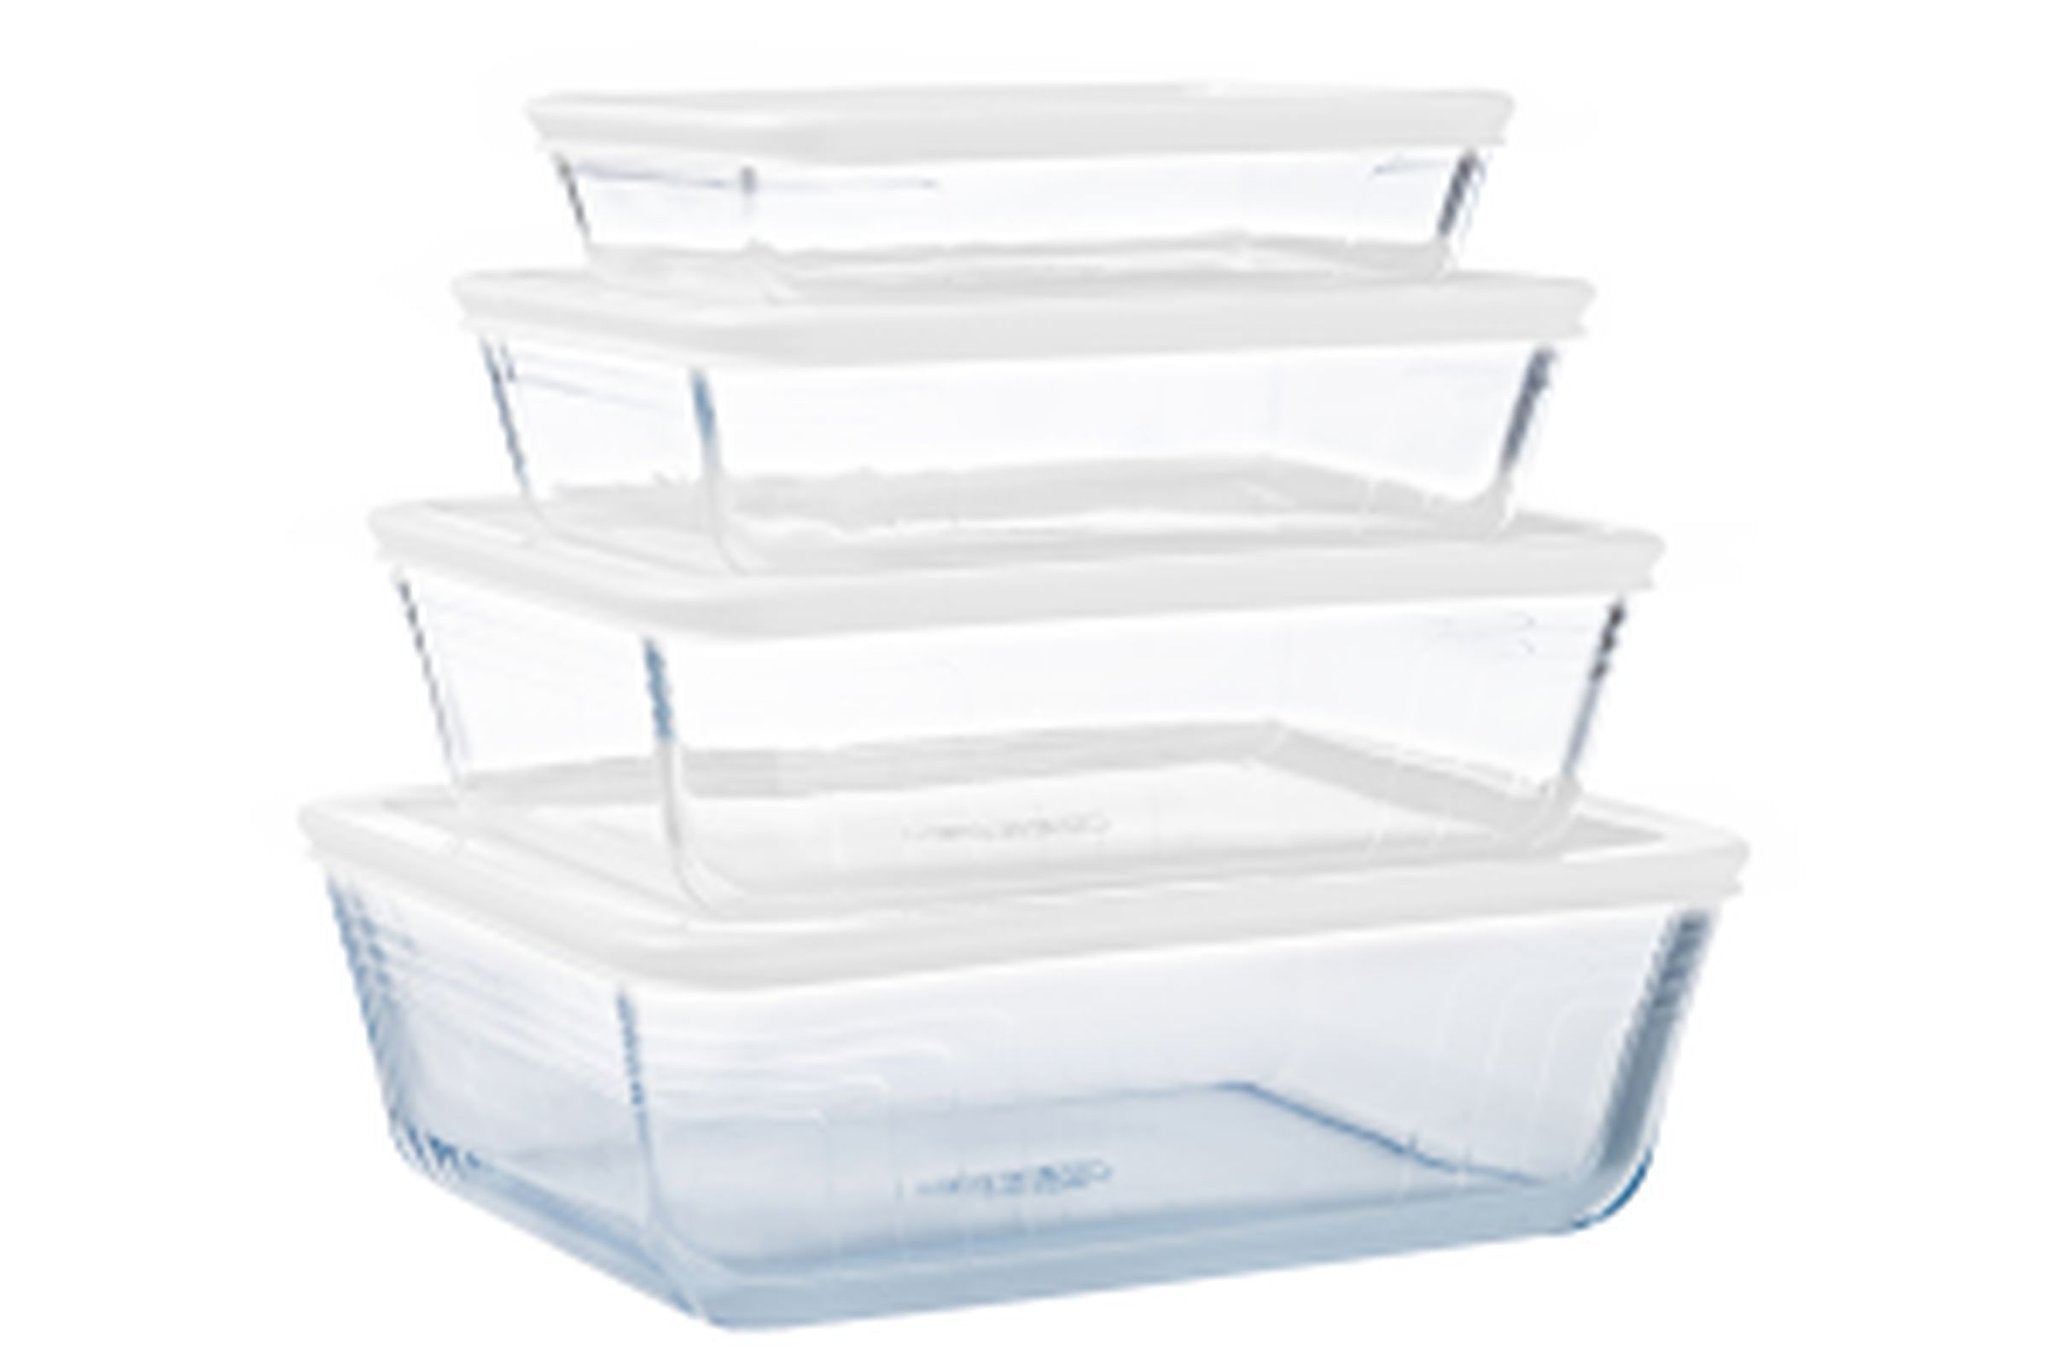 Pyrex Cook & Freeze Bowl with Lid Set of 4 Pieces